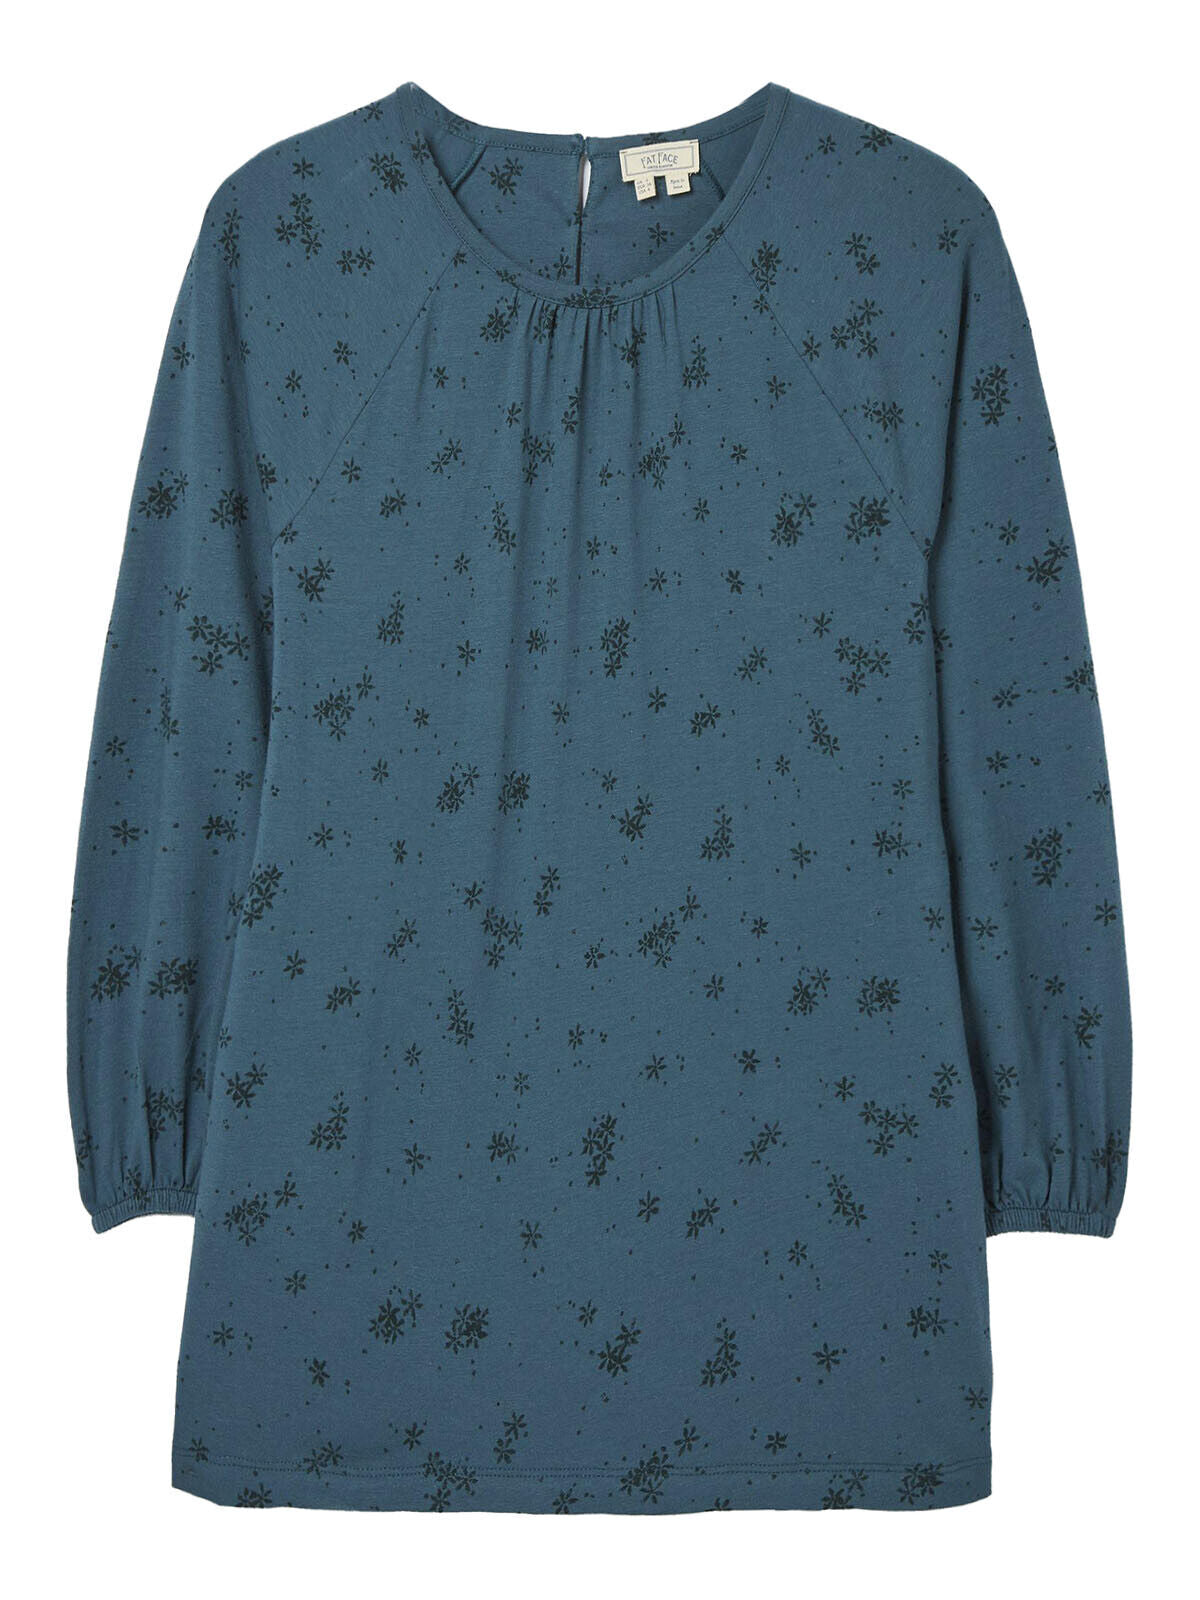 EX Fat Face Soft Teal Anna Nordic Ditsy Top in Sizes 12 or 16 RRP £35